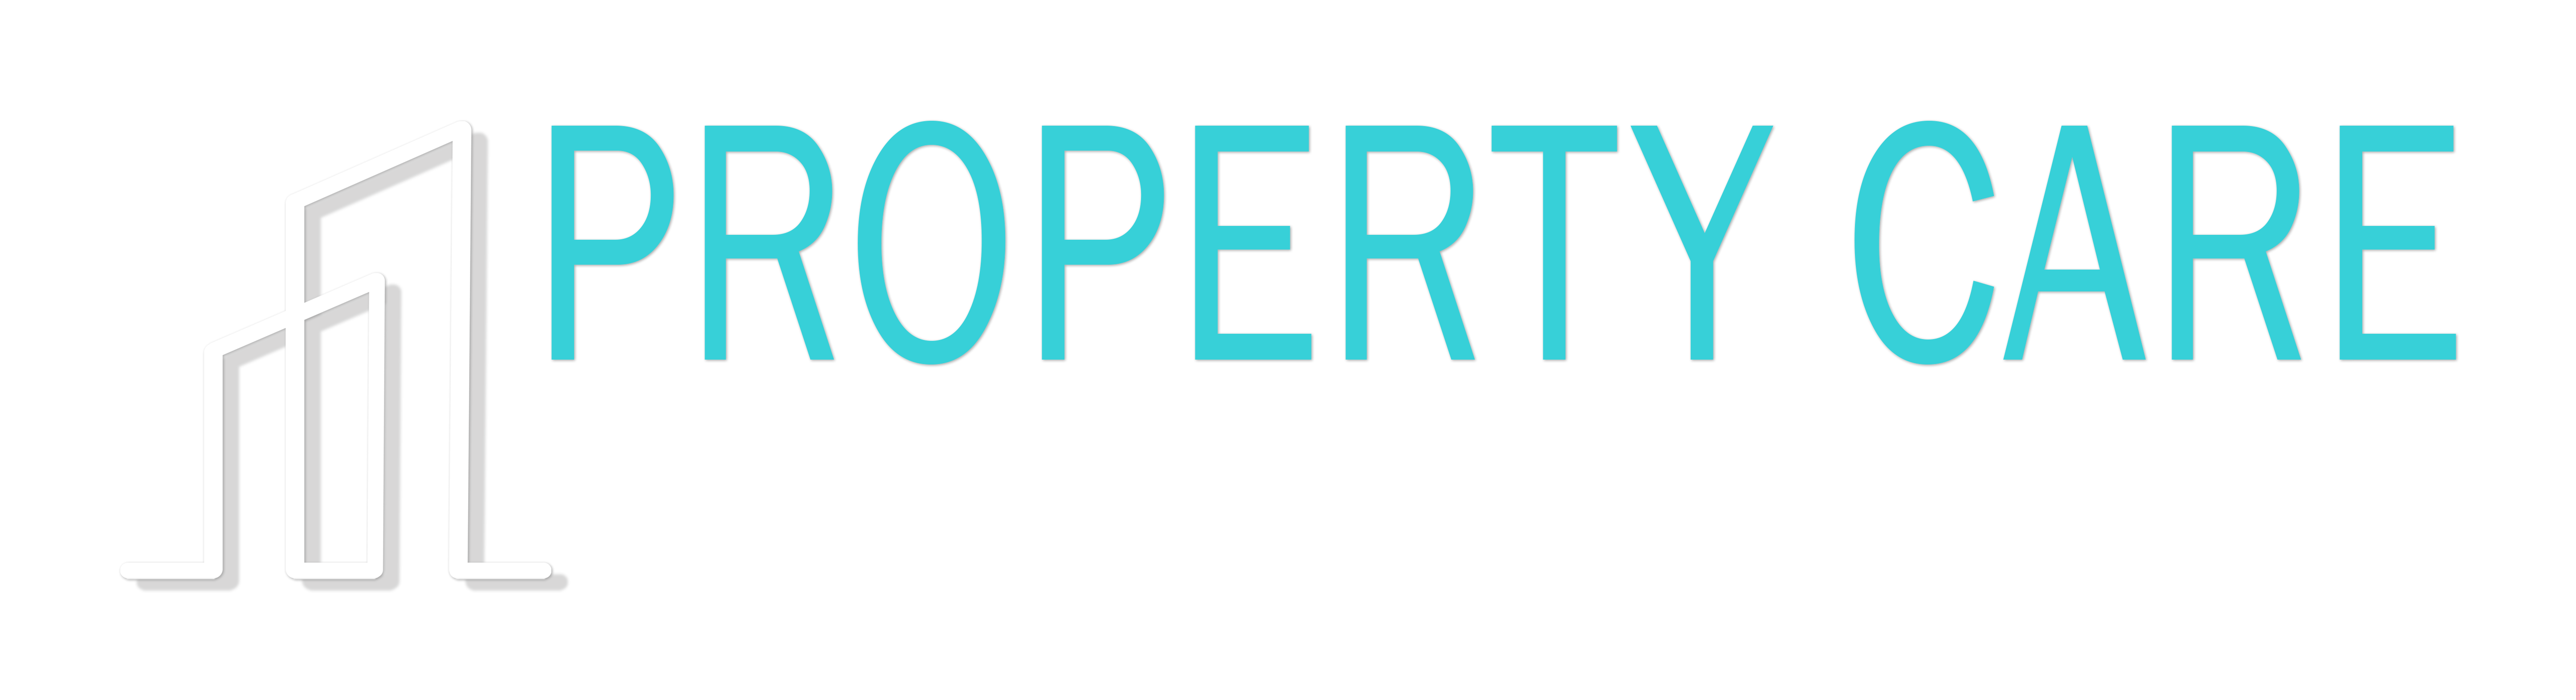 Property Care